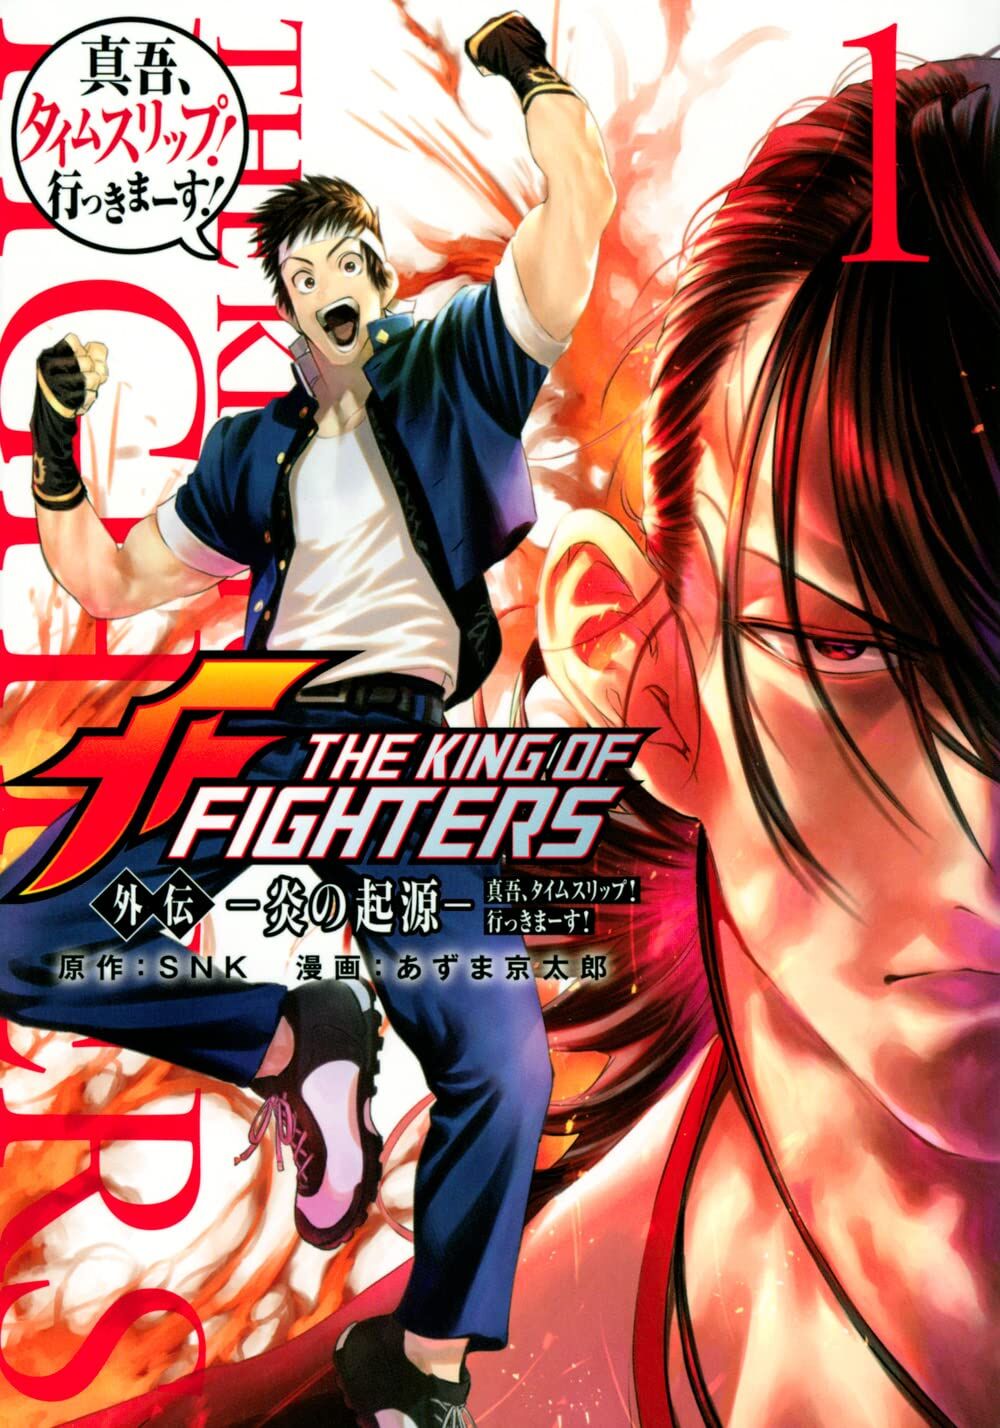 King of Fighters '98 - Same Name, Different Game Gaiden (Neo-Geo